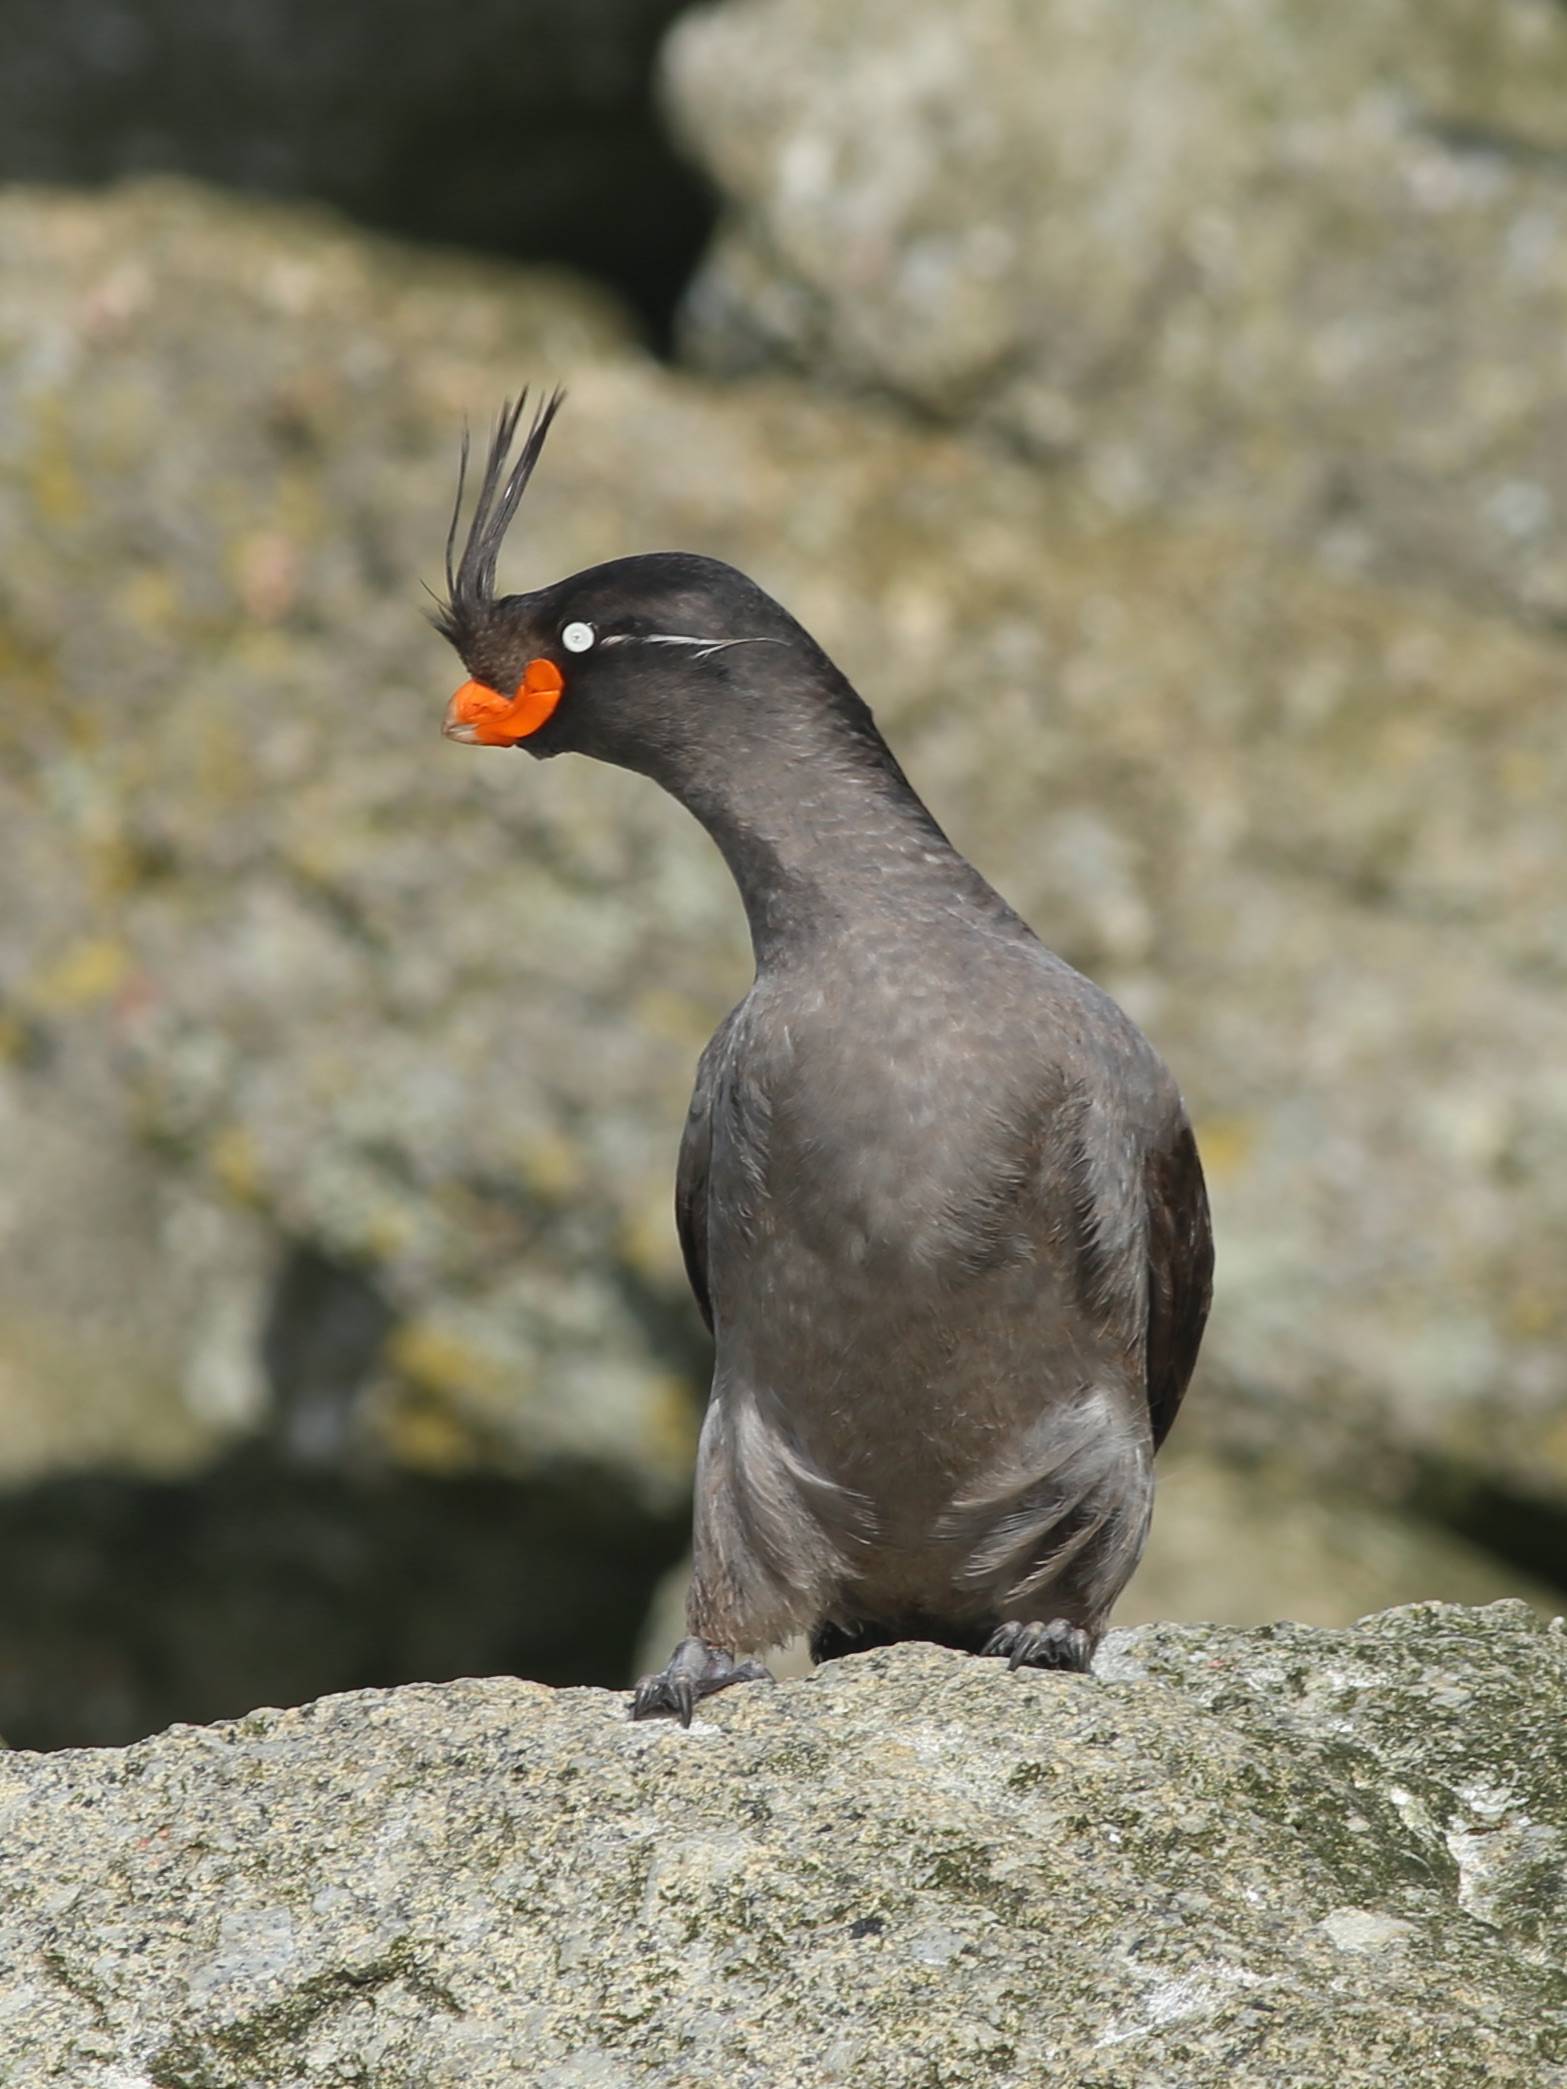 Crested auklets are sea birds with a tangerine scent. (Courtesy Photo | Hector Douglas)